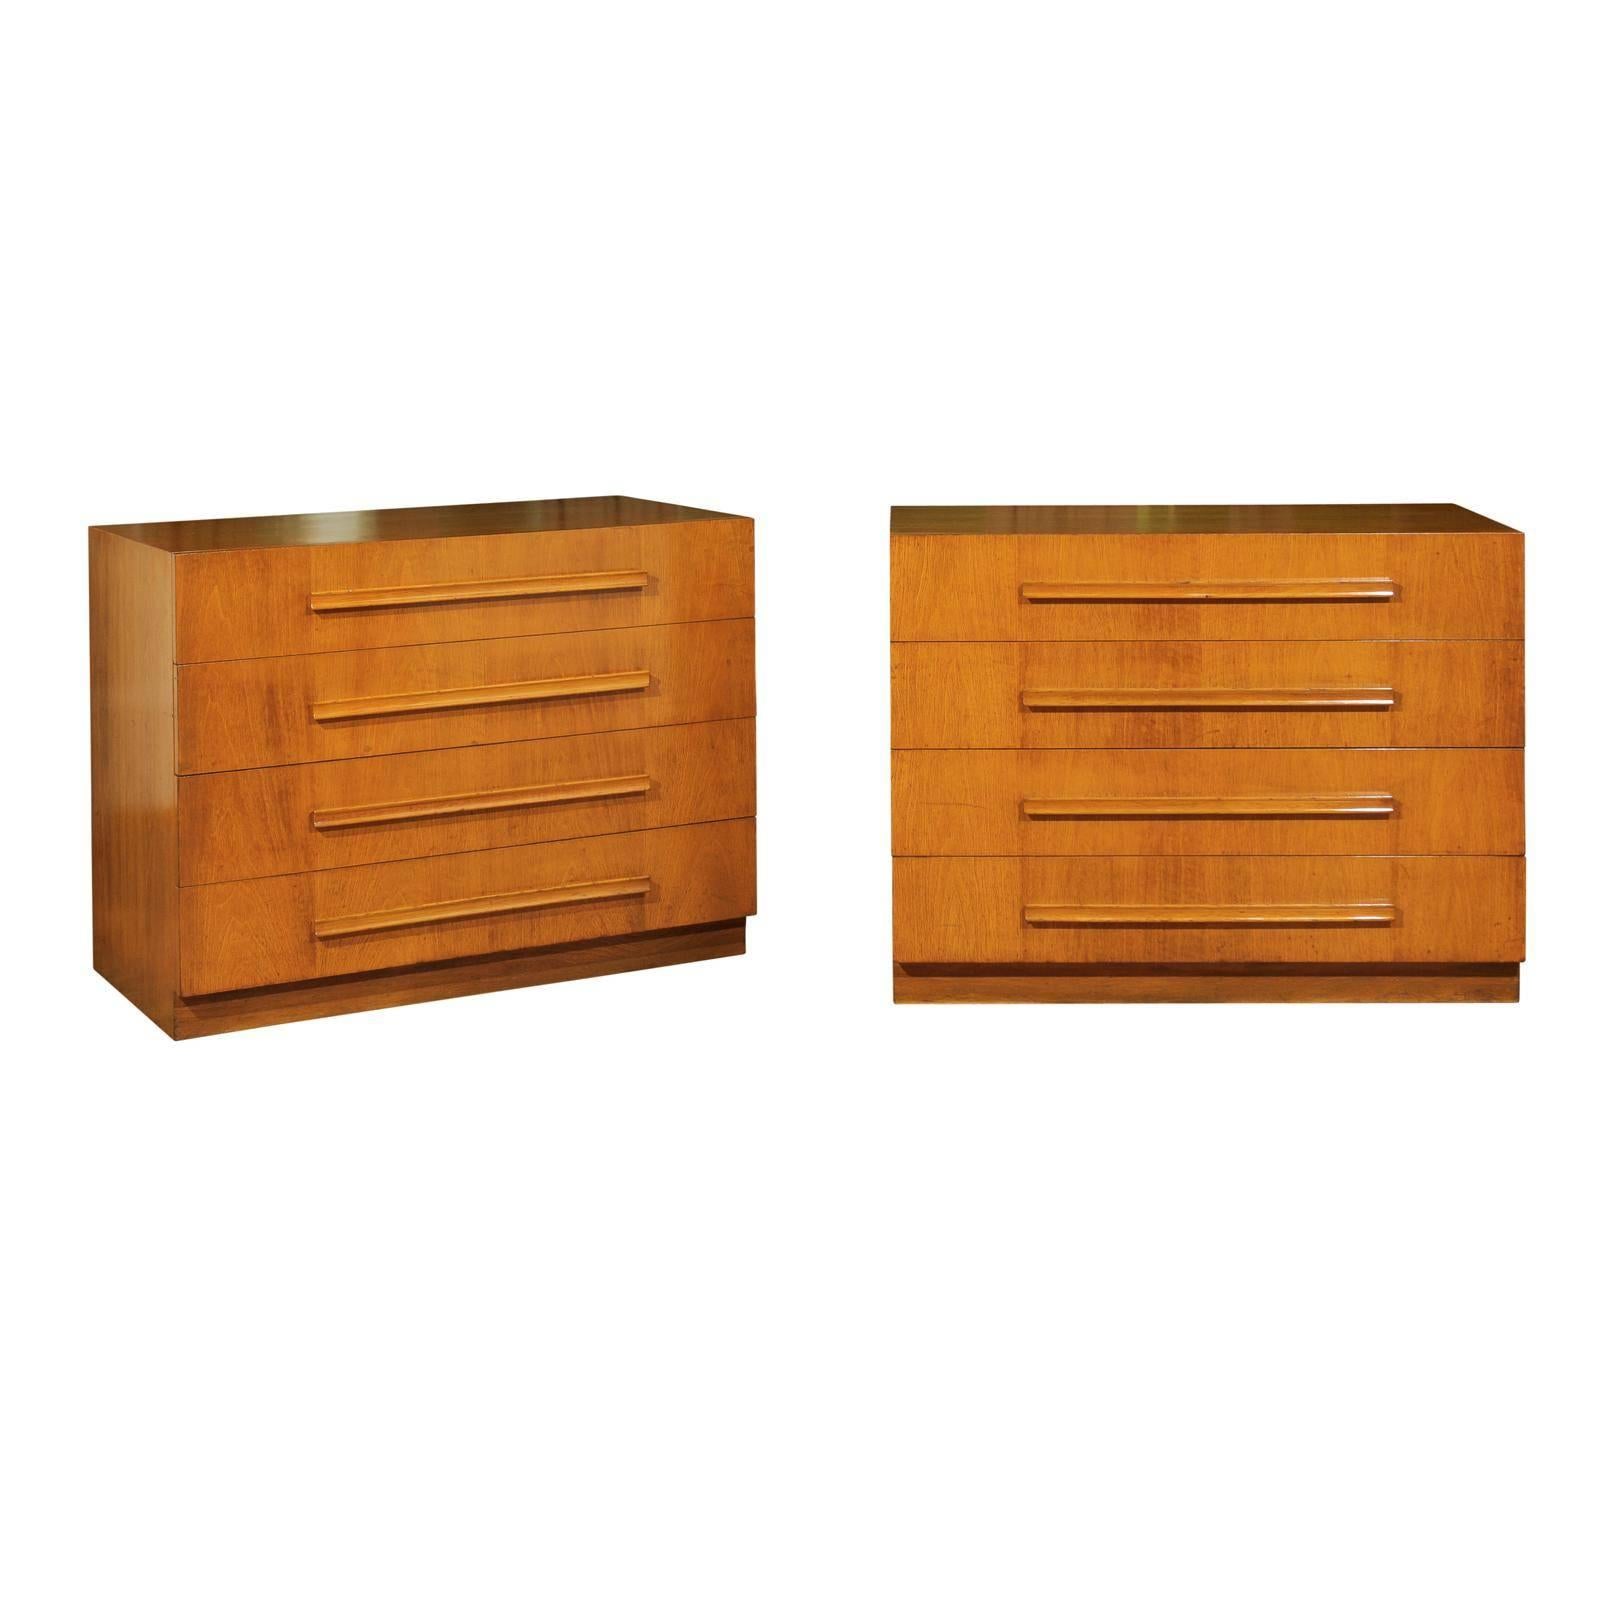 Coveted Pair of Saffron Walnut Commodes by T H Robsjohn-Gibbings, dated 1950 